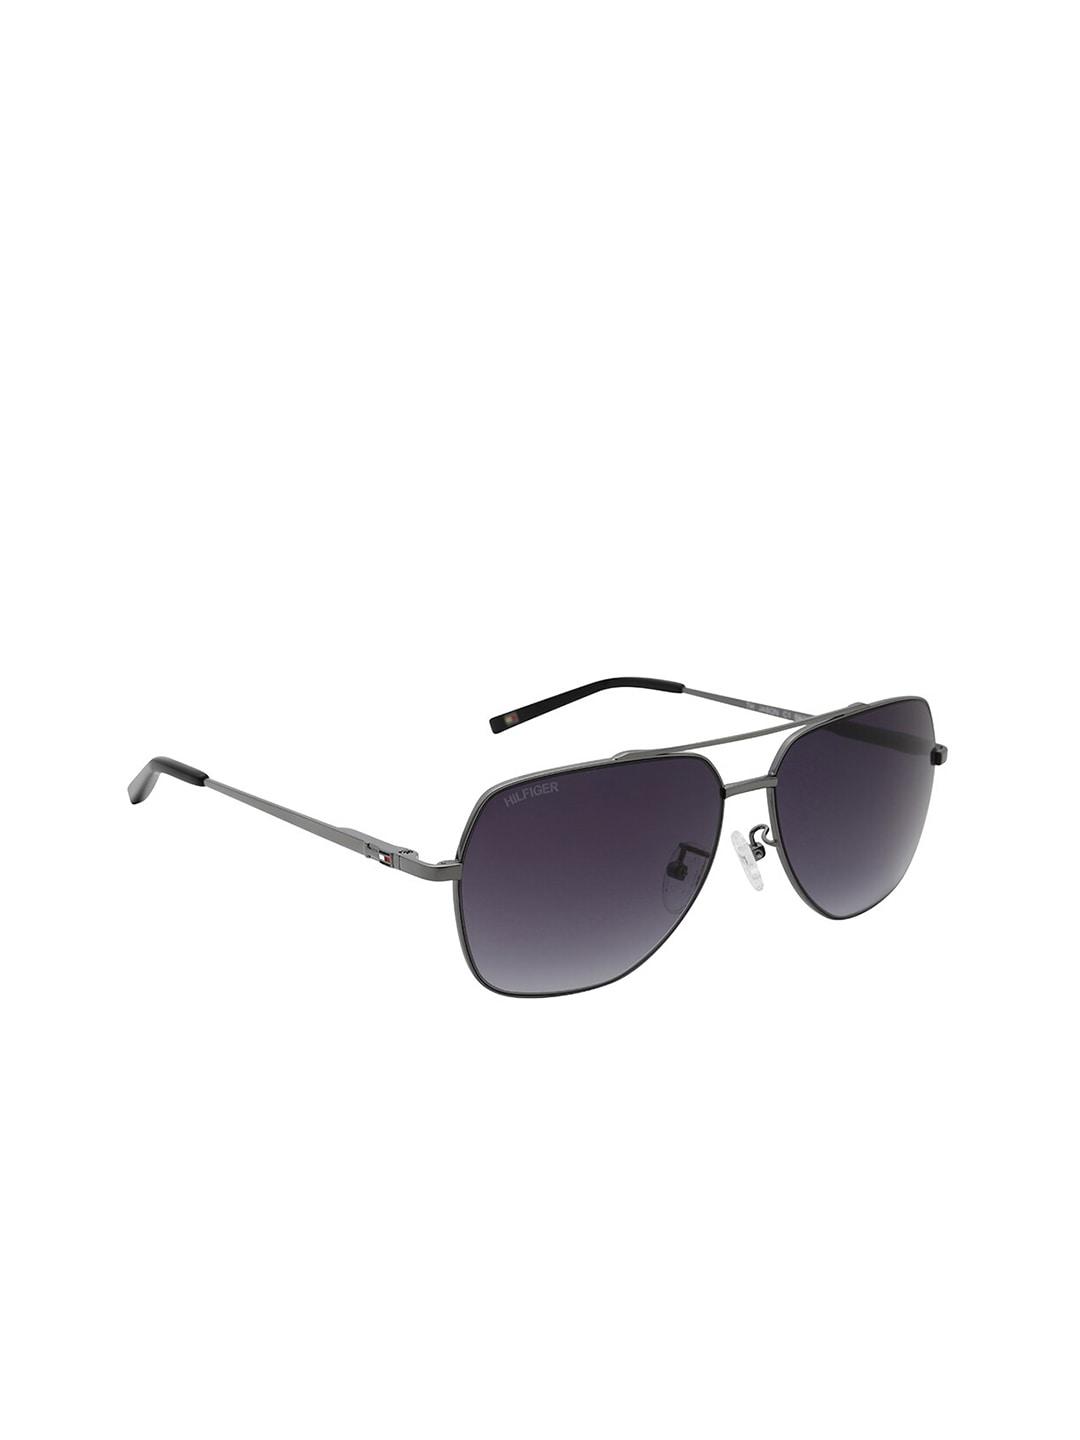 tommy-hilfiger-men-grey-lens-&-gunmetal-toned-square-sunglasses-with-uv-protected-lens